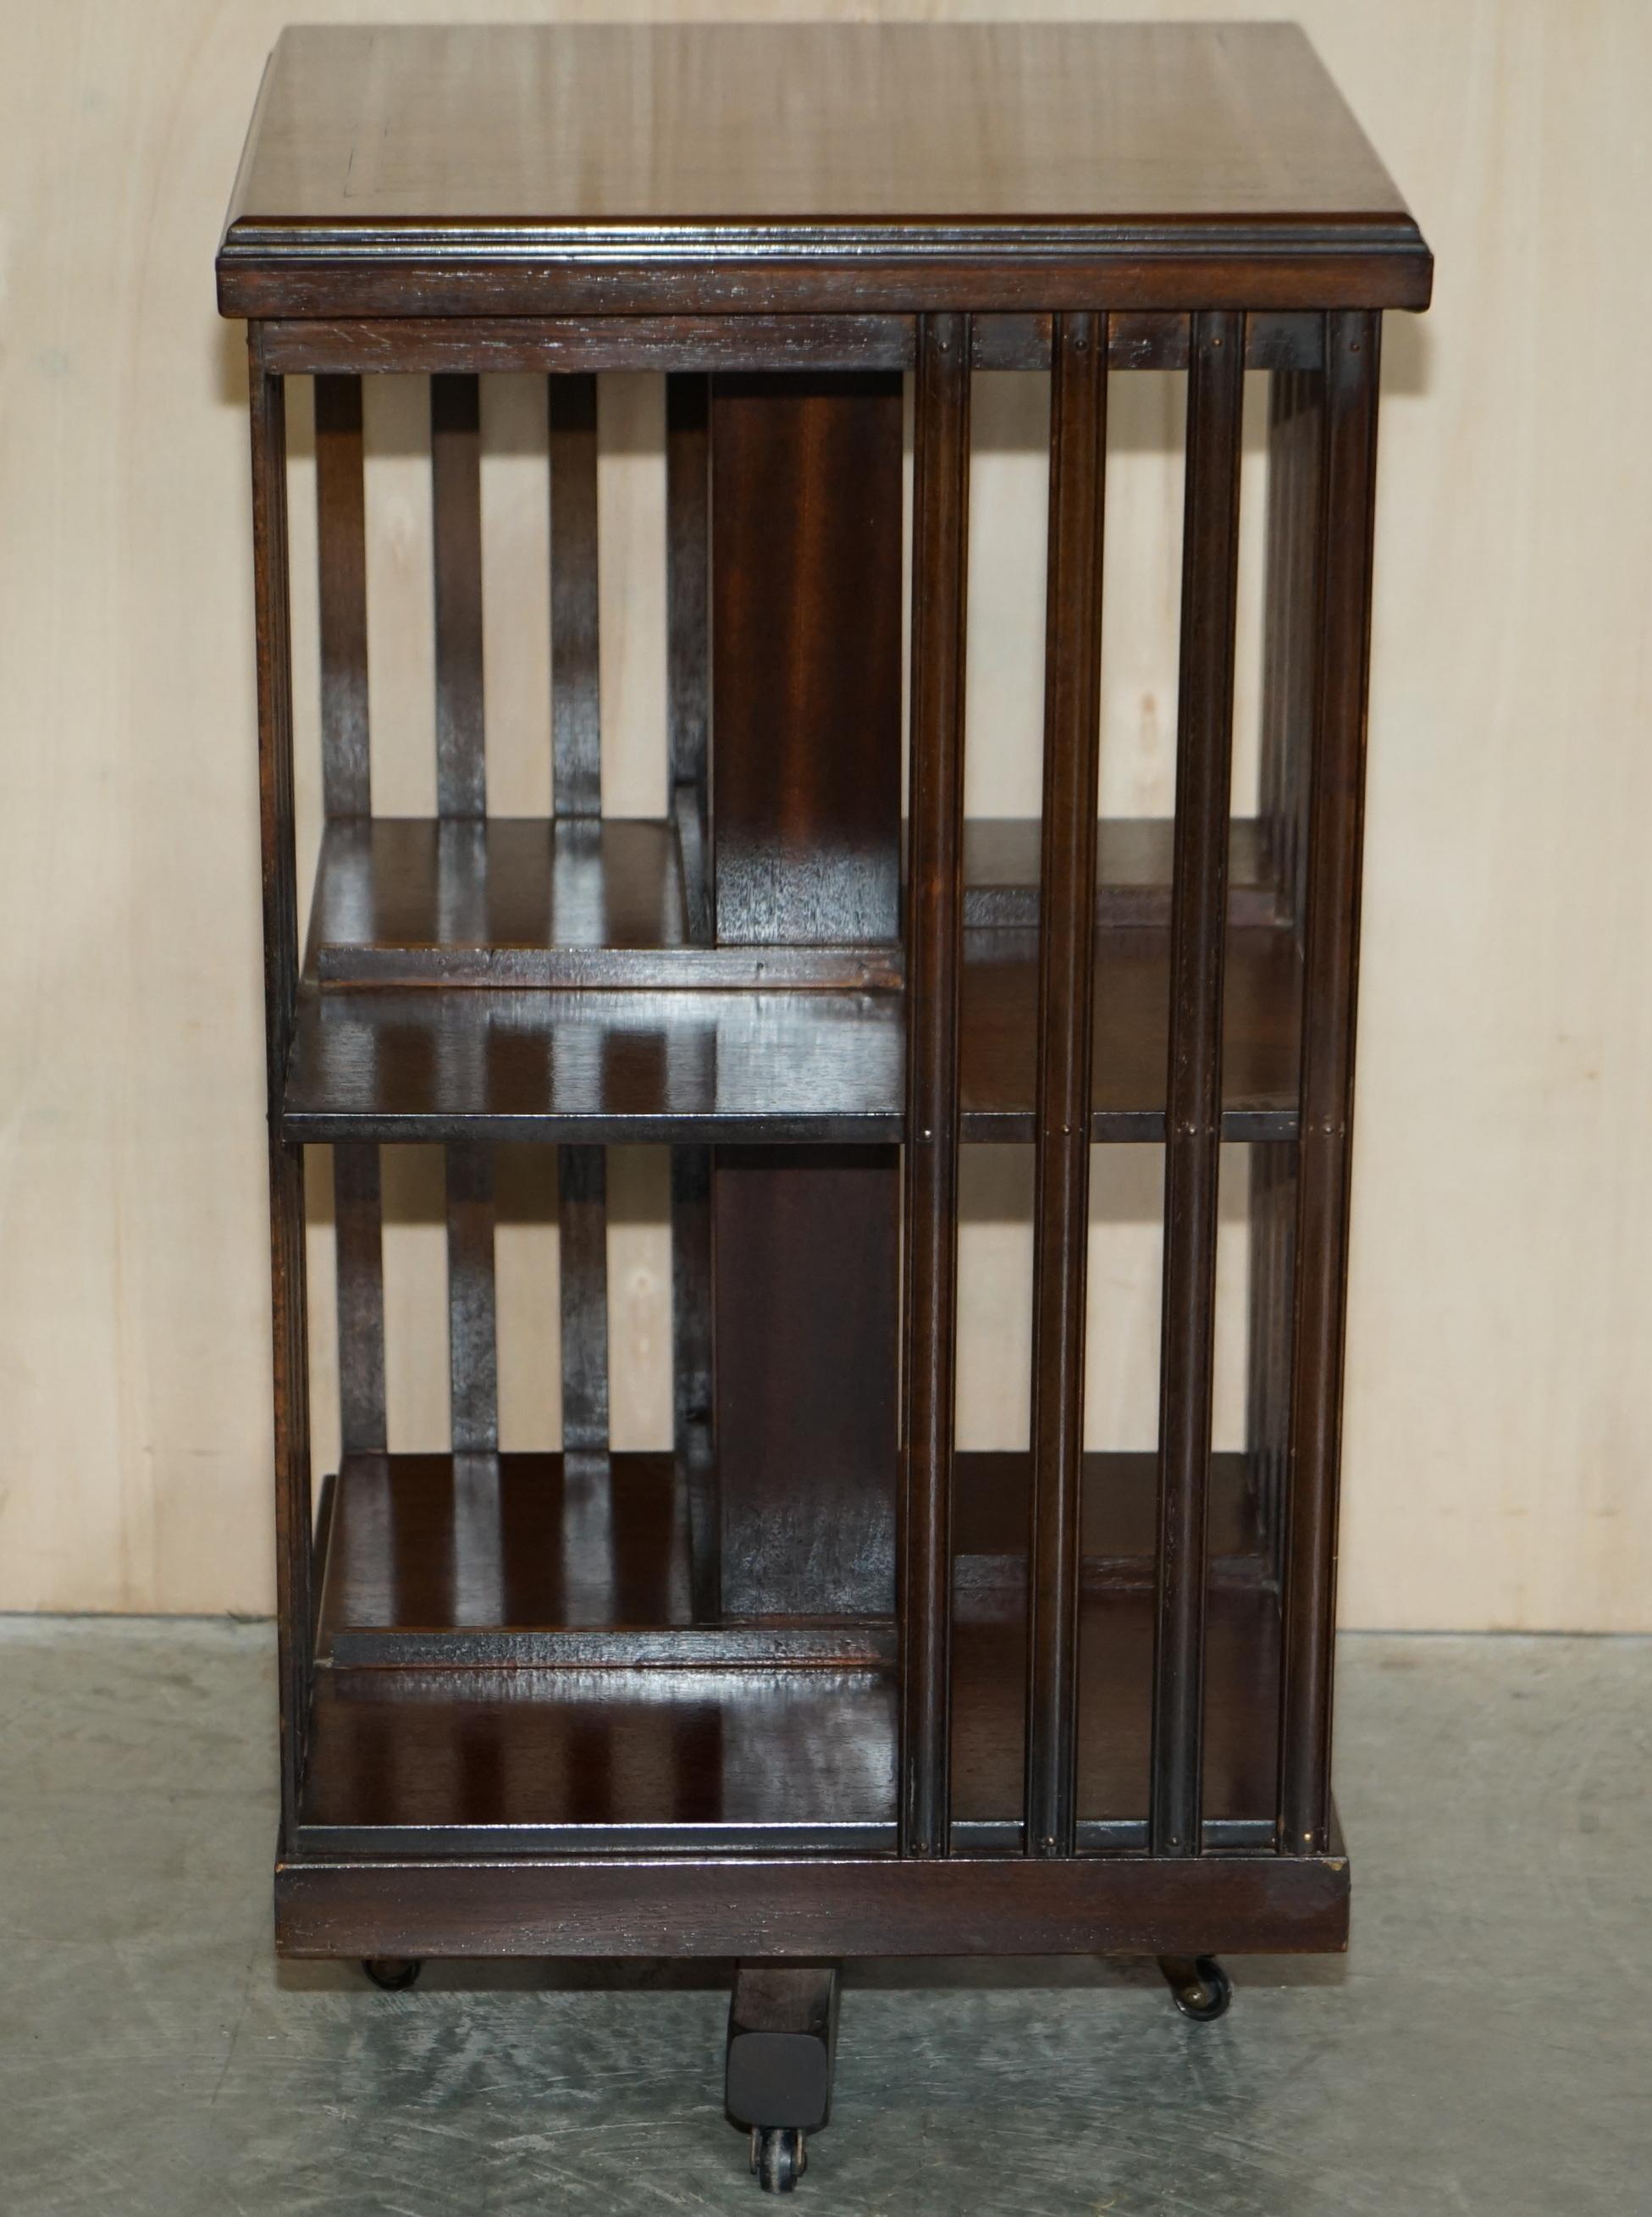 We are delighted to offer for sale this stunning vintage Sheraton Revival Mahogany & Satinwood revolving bookcase table

A very good looking well made and decorative piece. Made in the Sheraton revival style with wonderful inlay and extremely